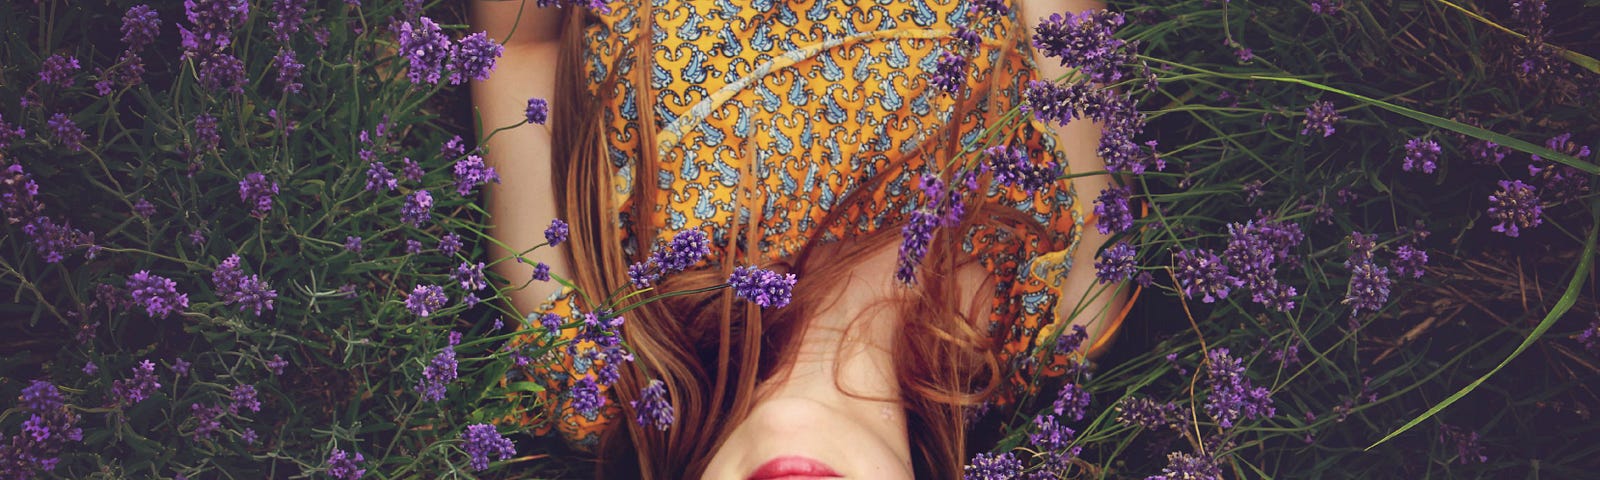 A red-haired woman in a gold and green printed top lays serenely, with eyes closed, on a bed of purple and green lavender-like plants.